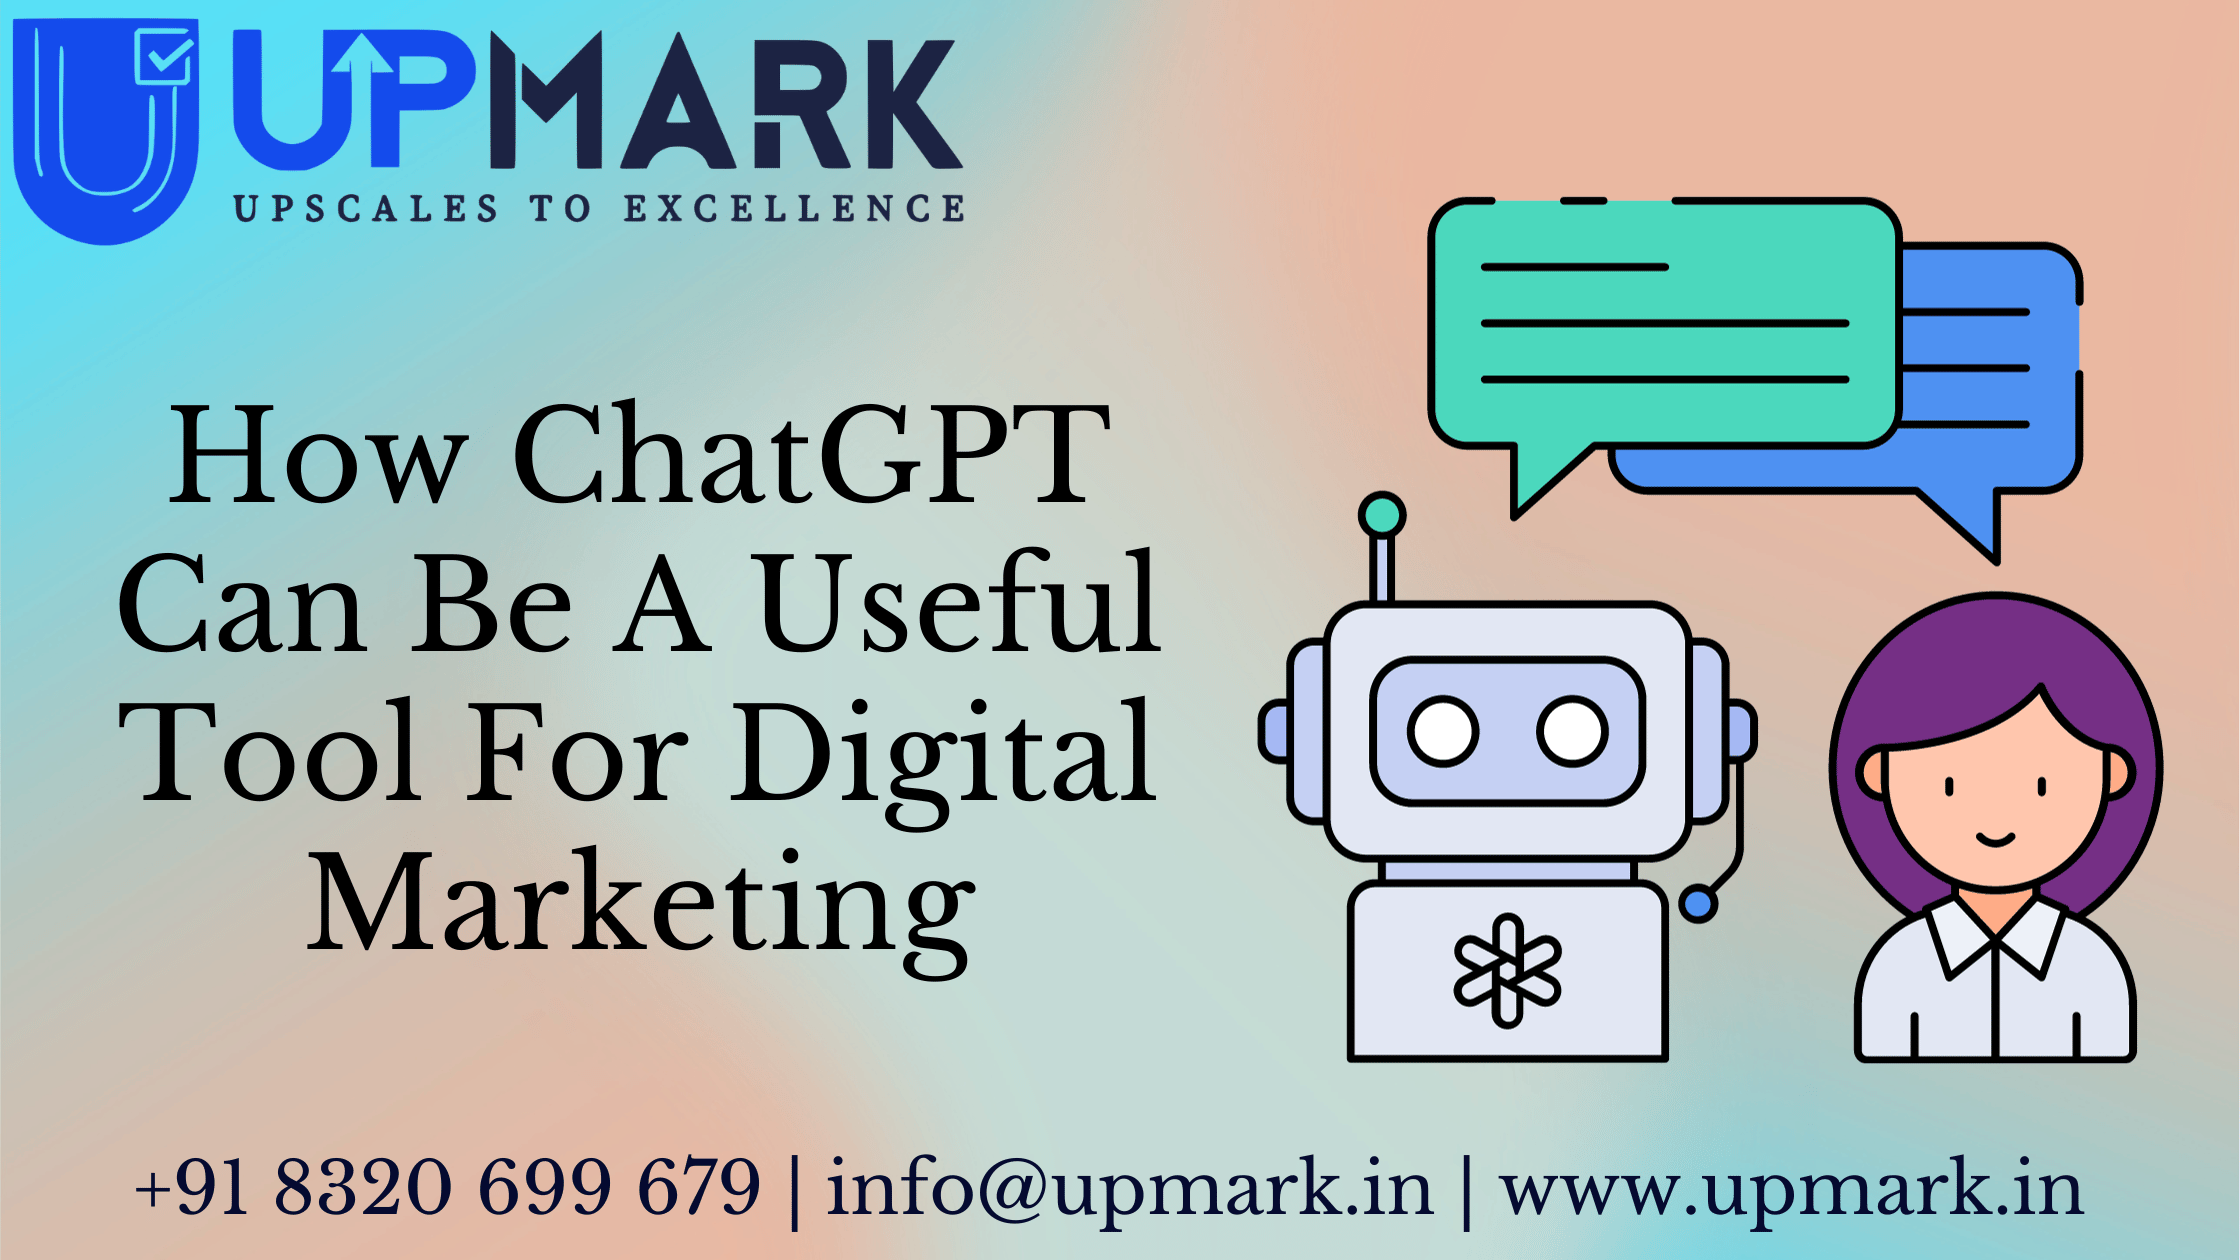 How ChatGPT Can Be A Useful Tool For Digital Marketing